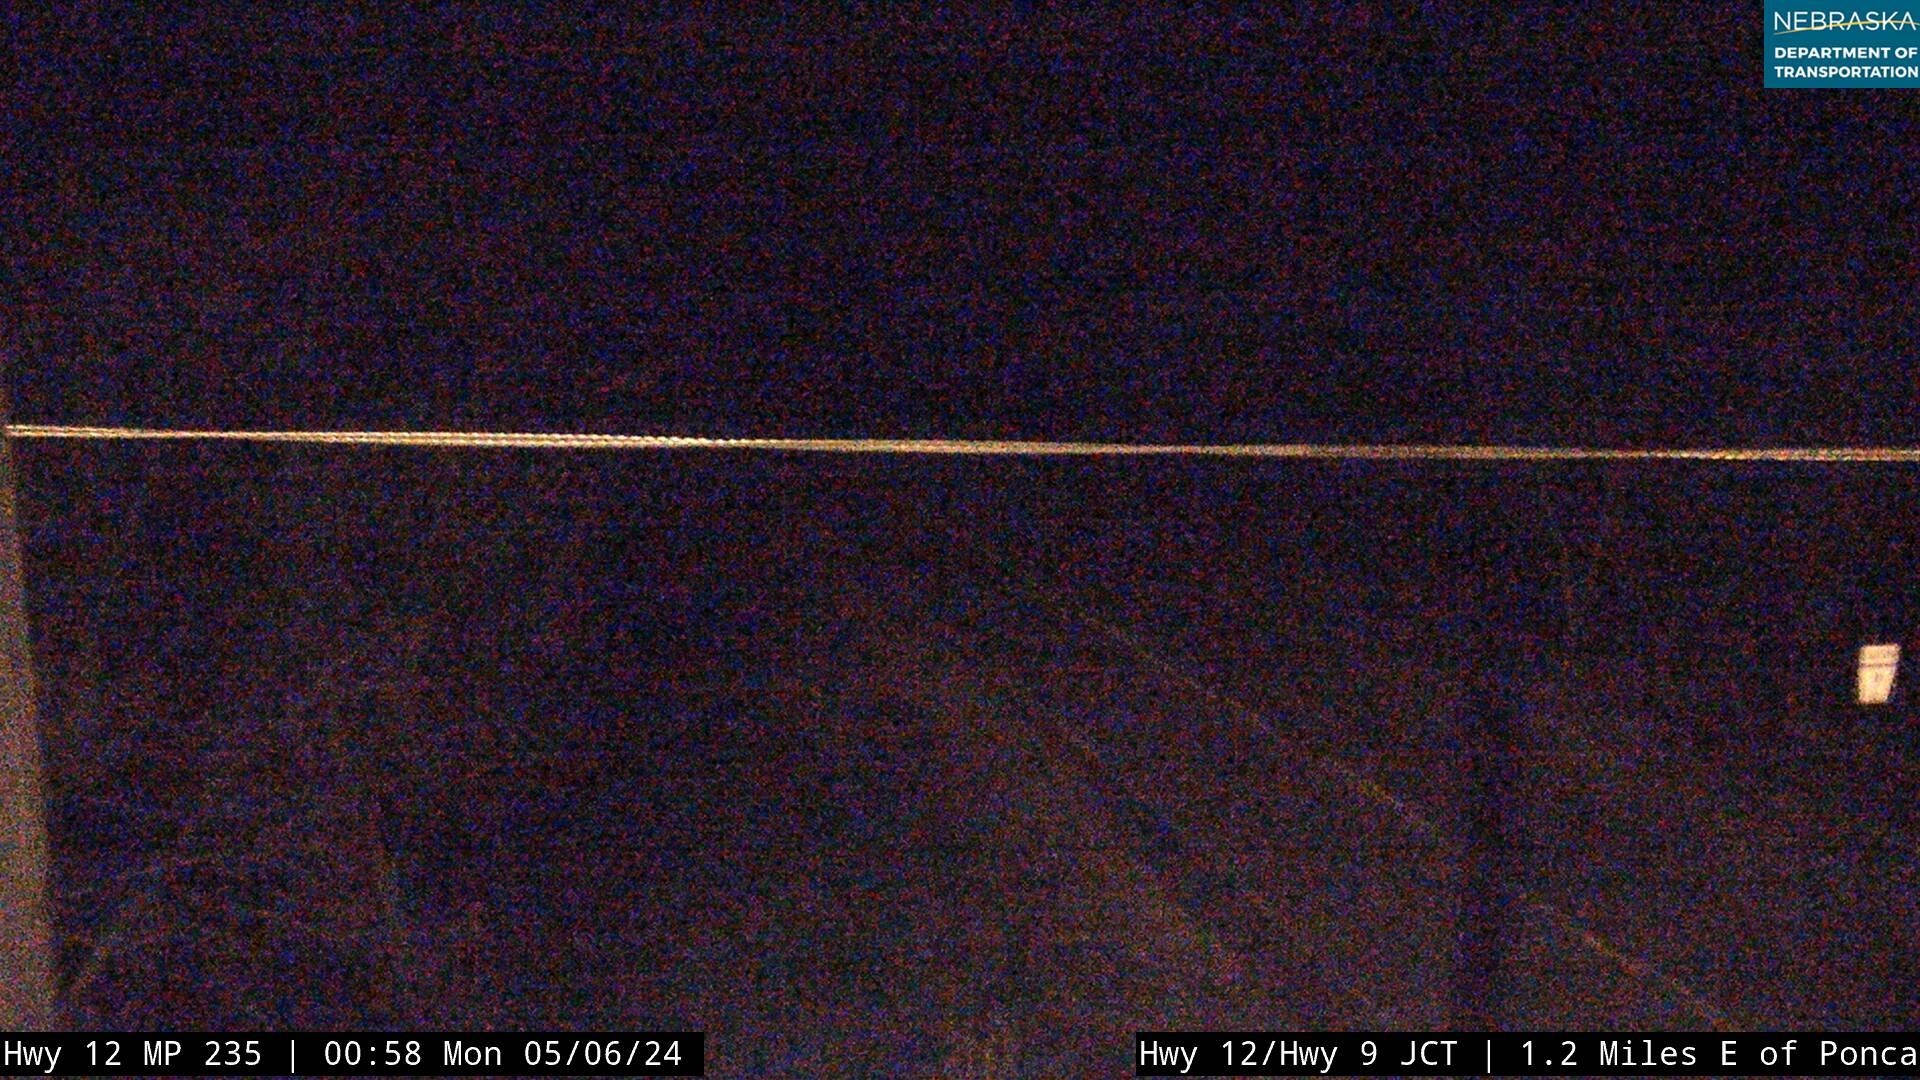 Ponca: NE 12: S of - 9 looking south Traffic Camera